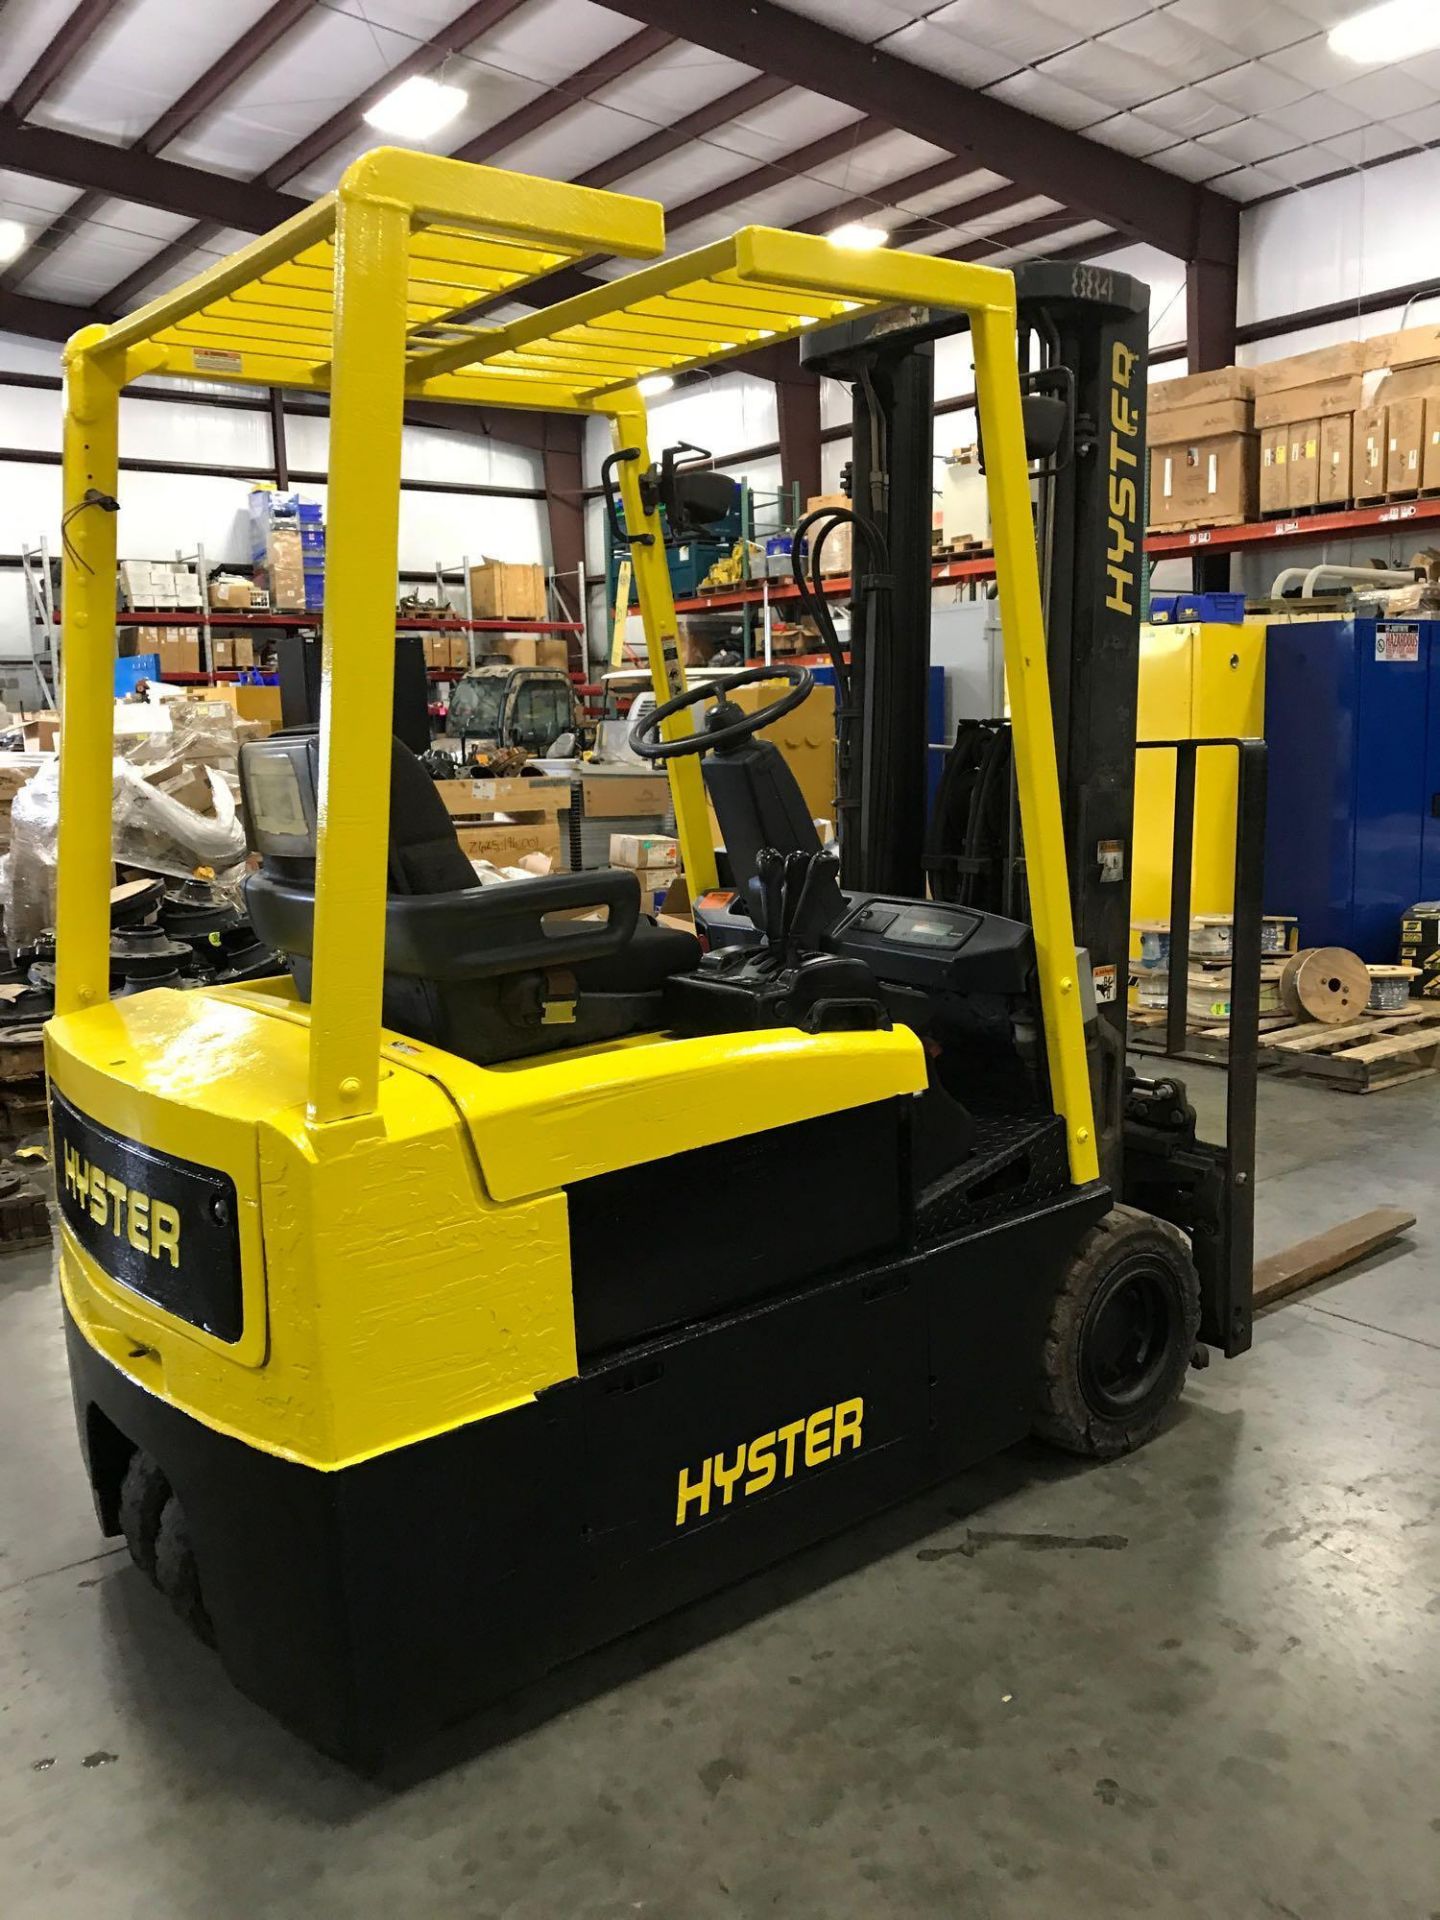 HYSTER J40XMT ELECTRIC FORKLIFT, 4,000 LB LIFT CAPACITY - Image 2 of 8